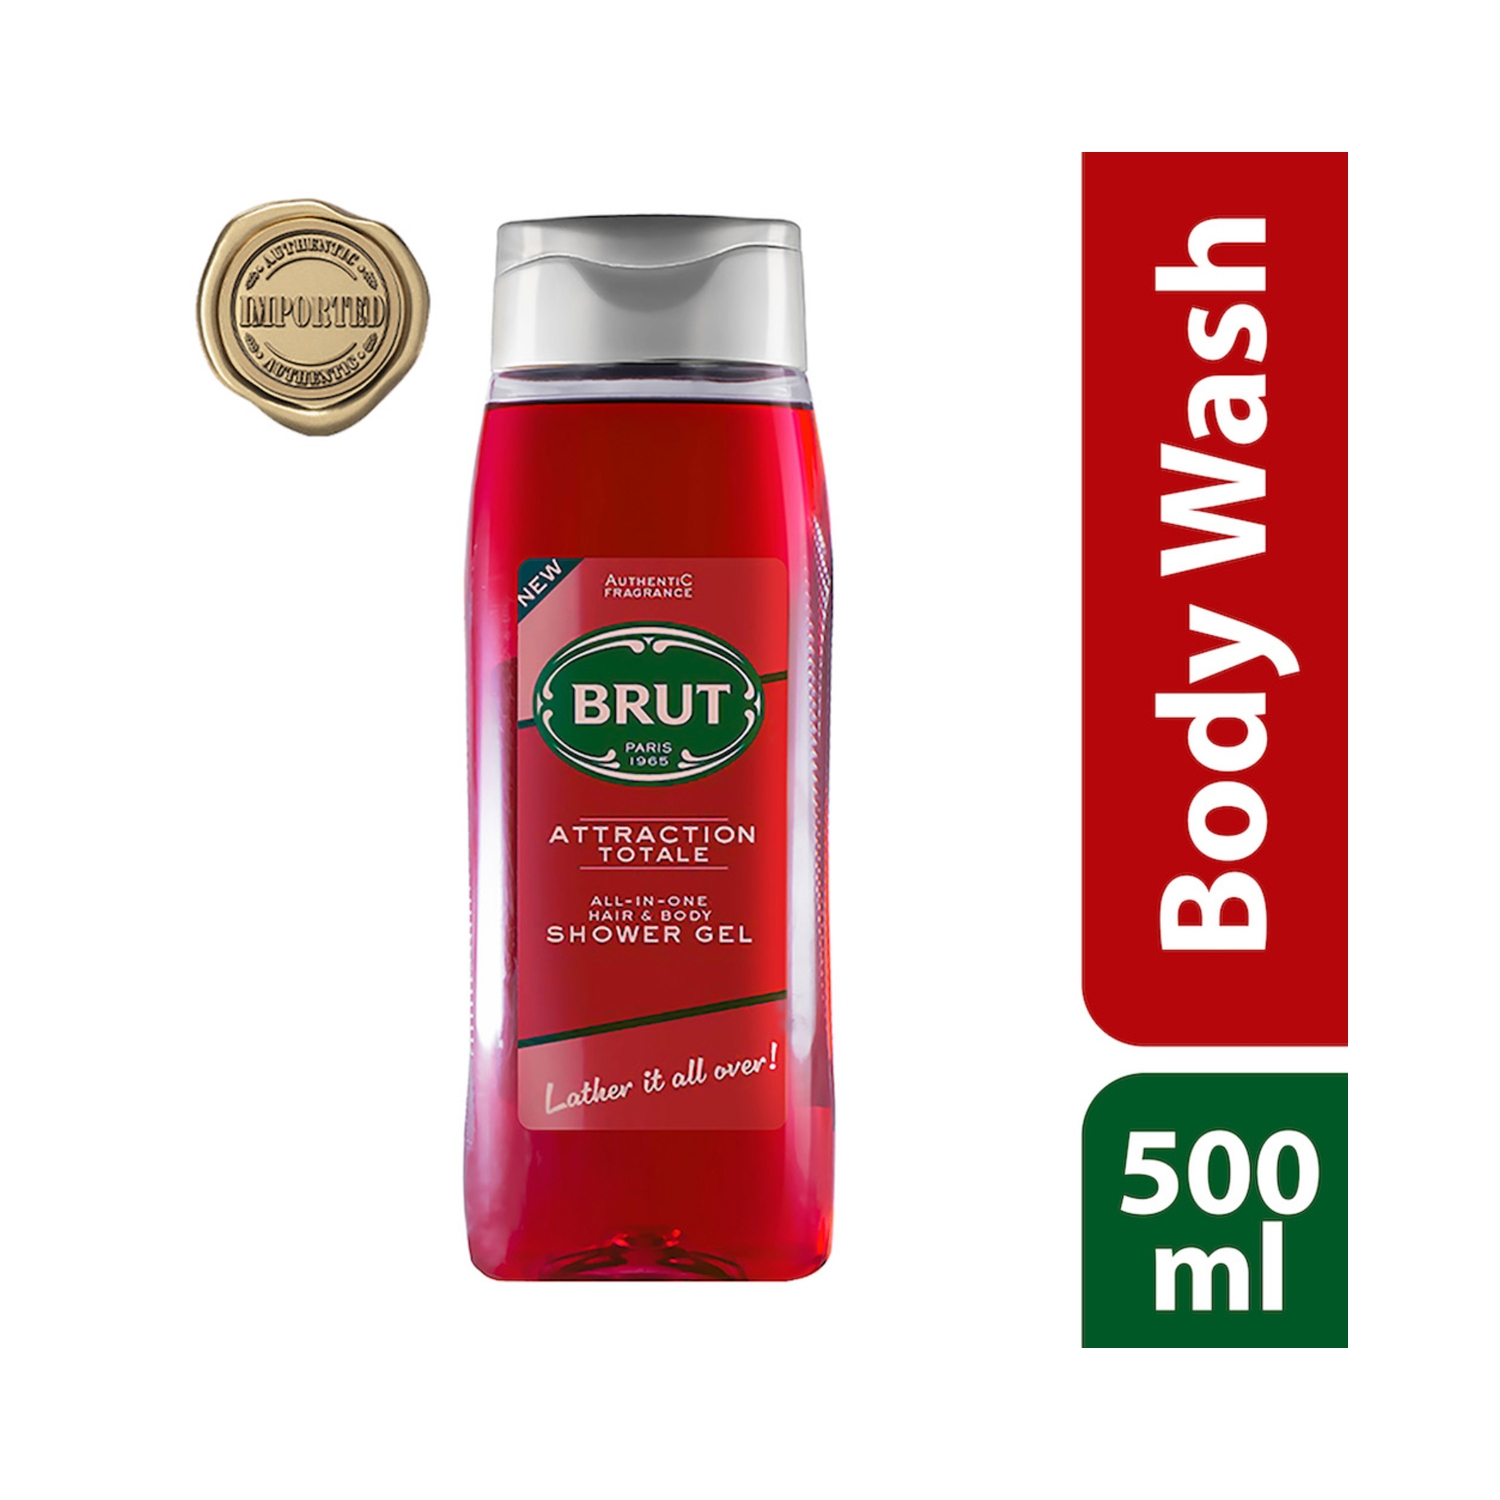 Brut | Brut Attraction Totale All-In-One Hair & Body Shower Gel (500ml)